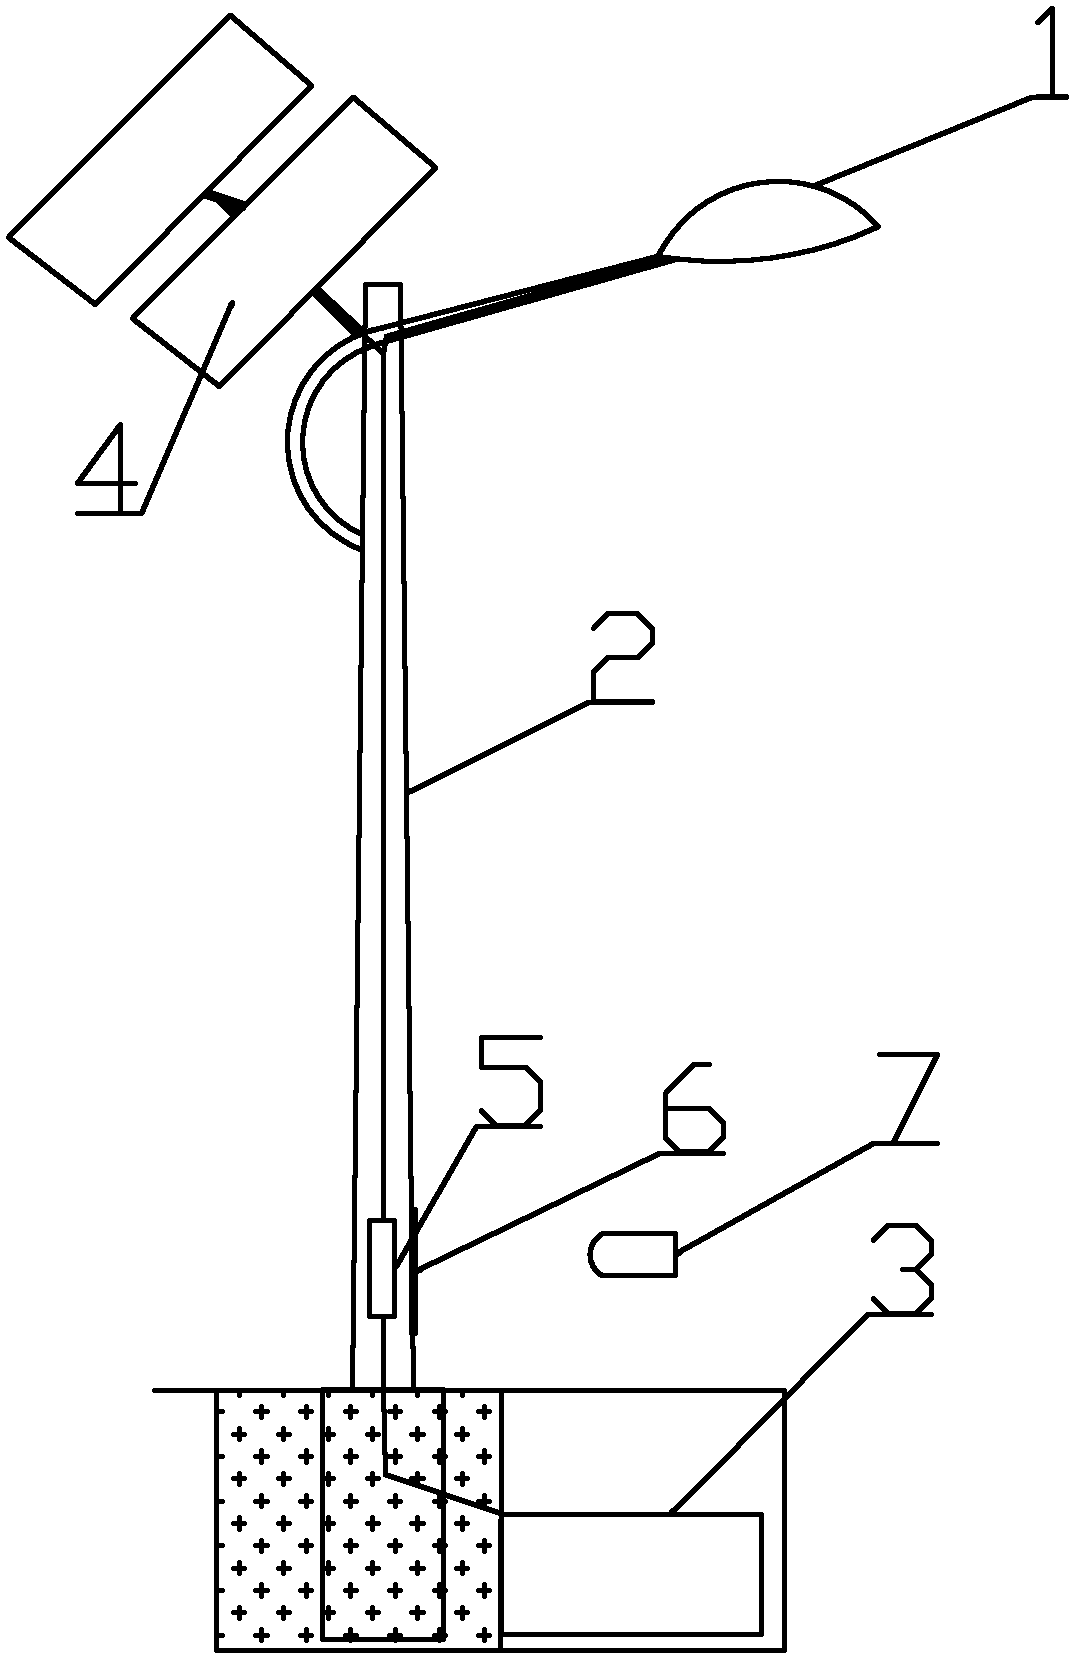 Solar LED (Light Emitting Diode) street lamp and control method thereof